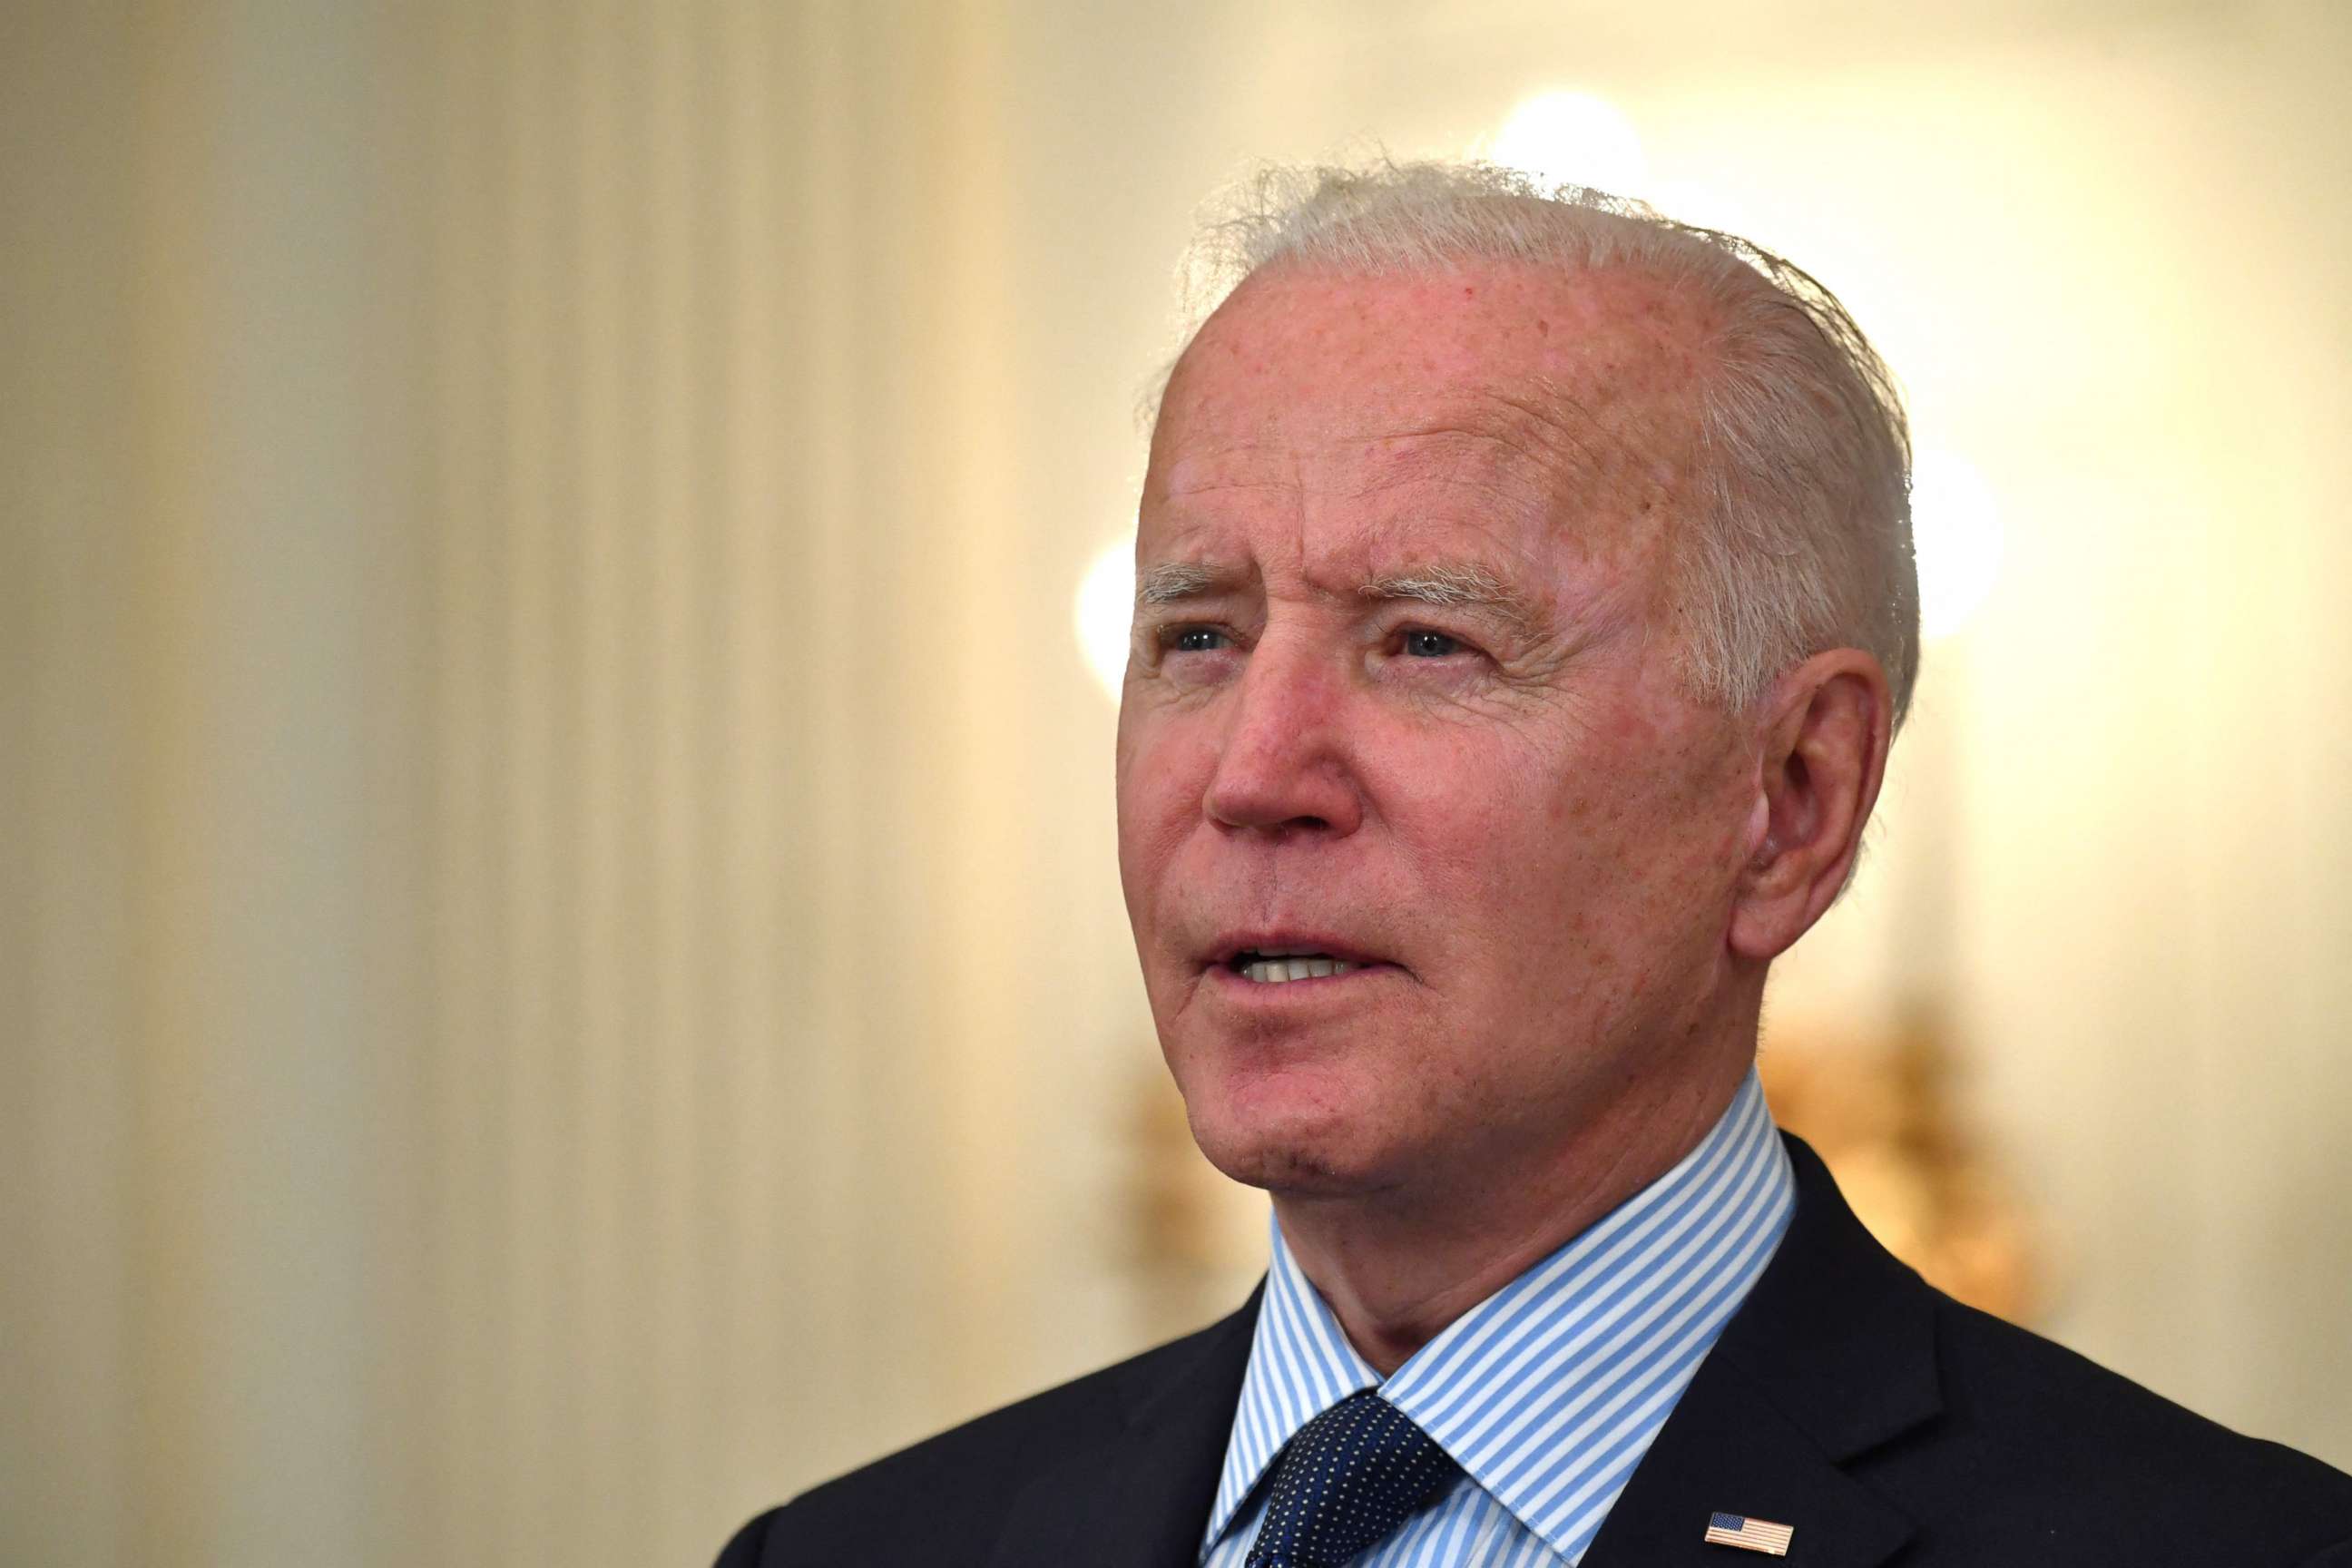 PHOTO: President Joe Biden speak about the Covid-19 response and the vaccination program in the State Dining Room of the White House, May 4, 2021.